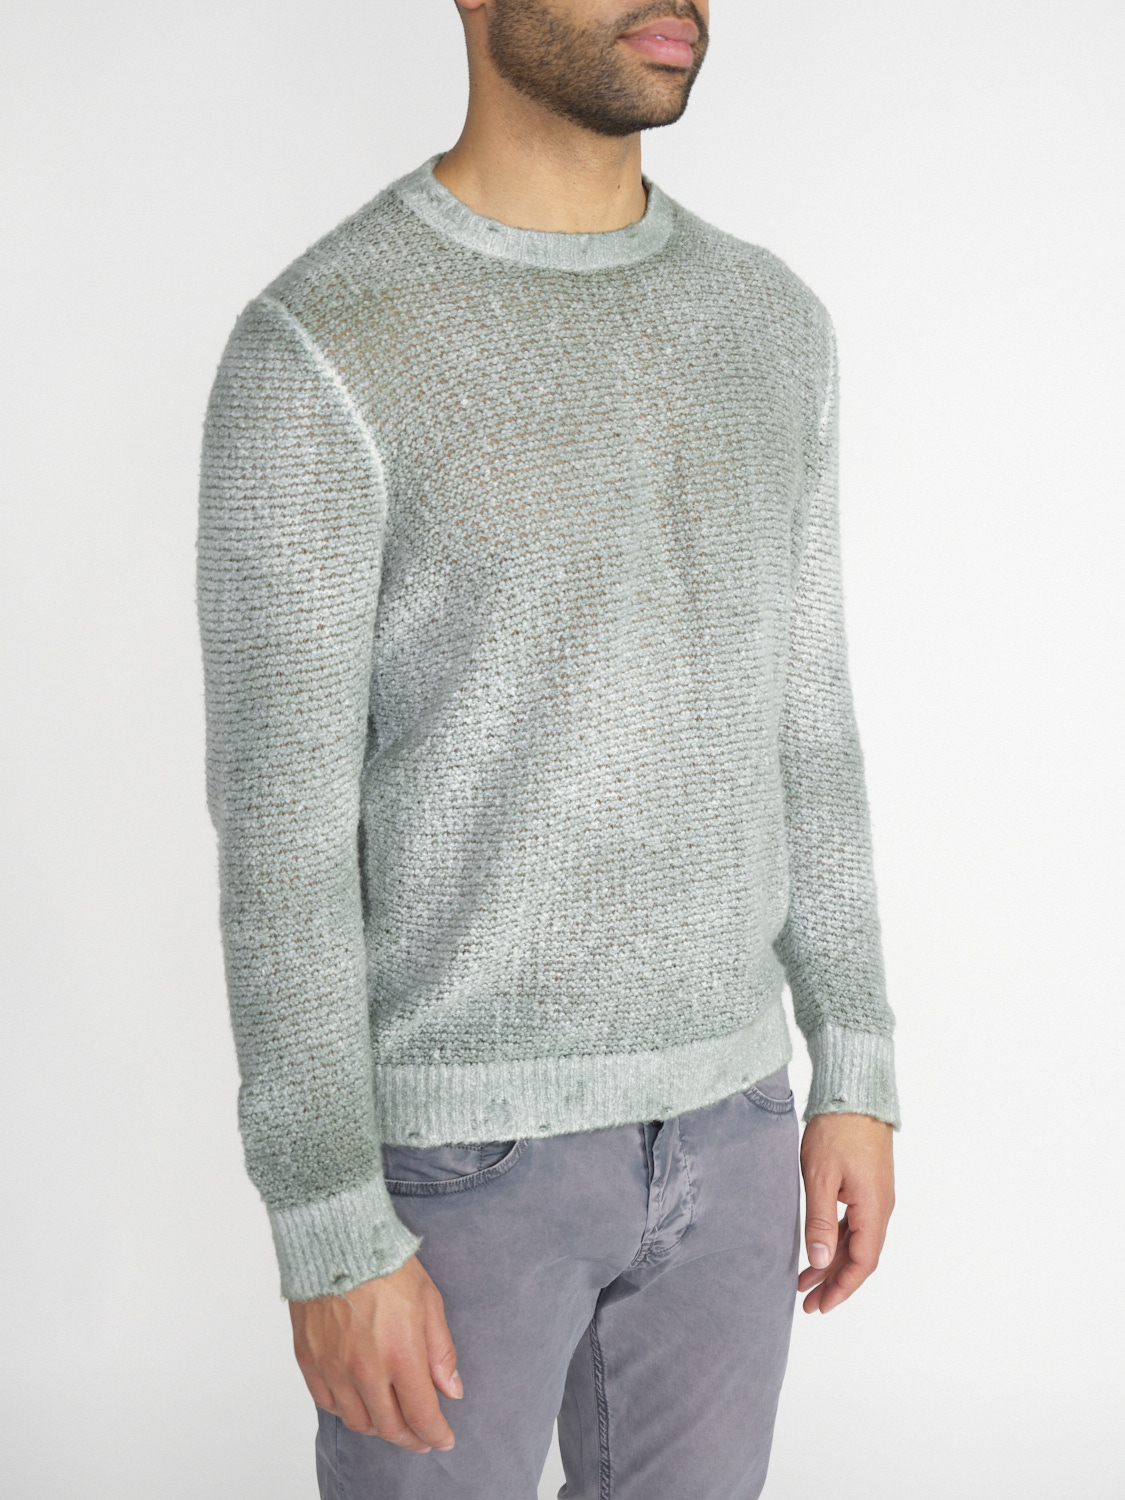 Avant Toi Soft sweater with a crocheted look  green M